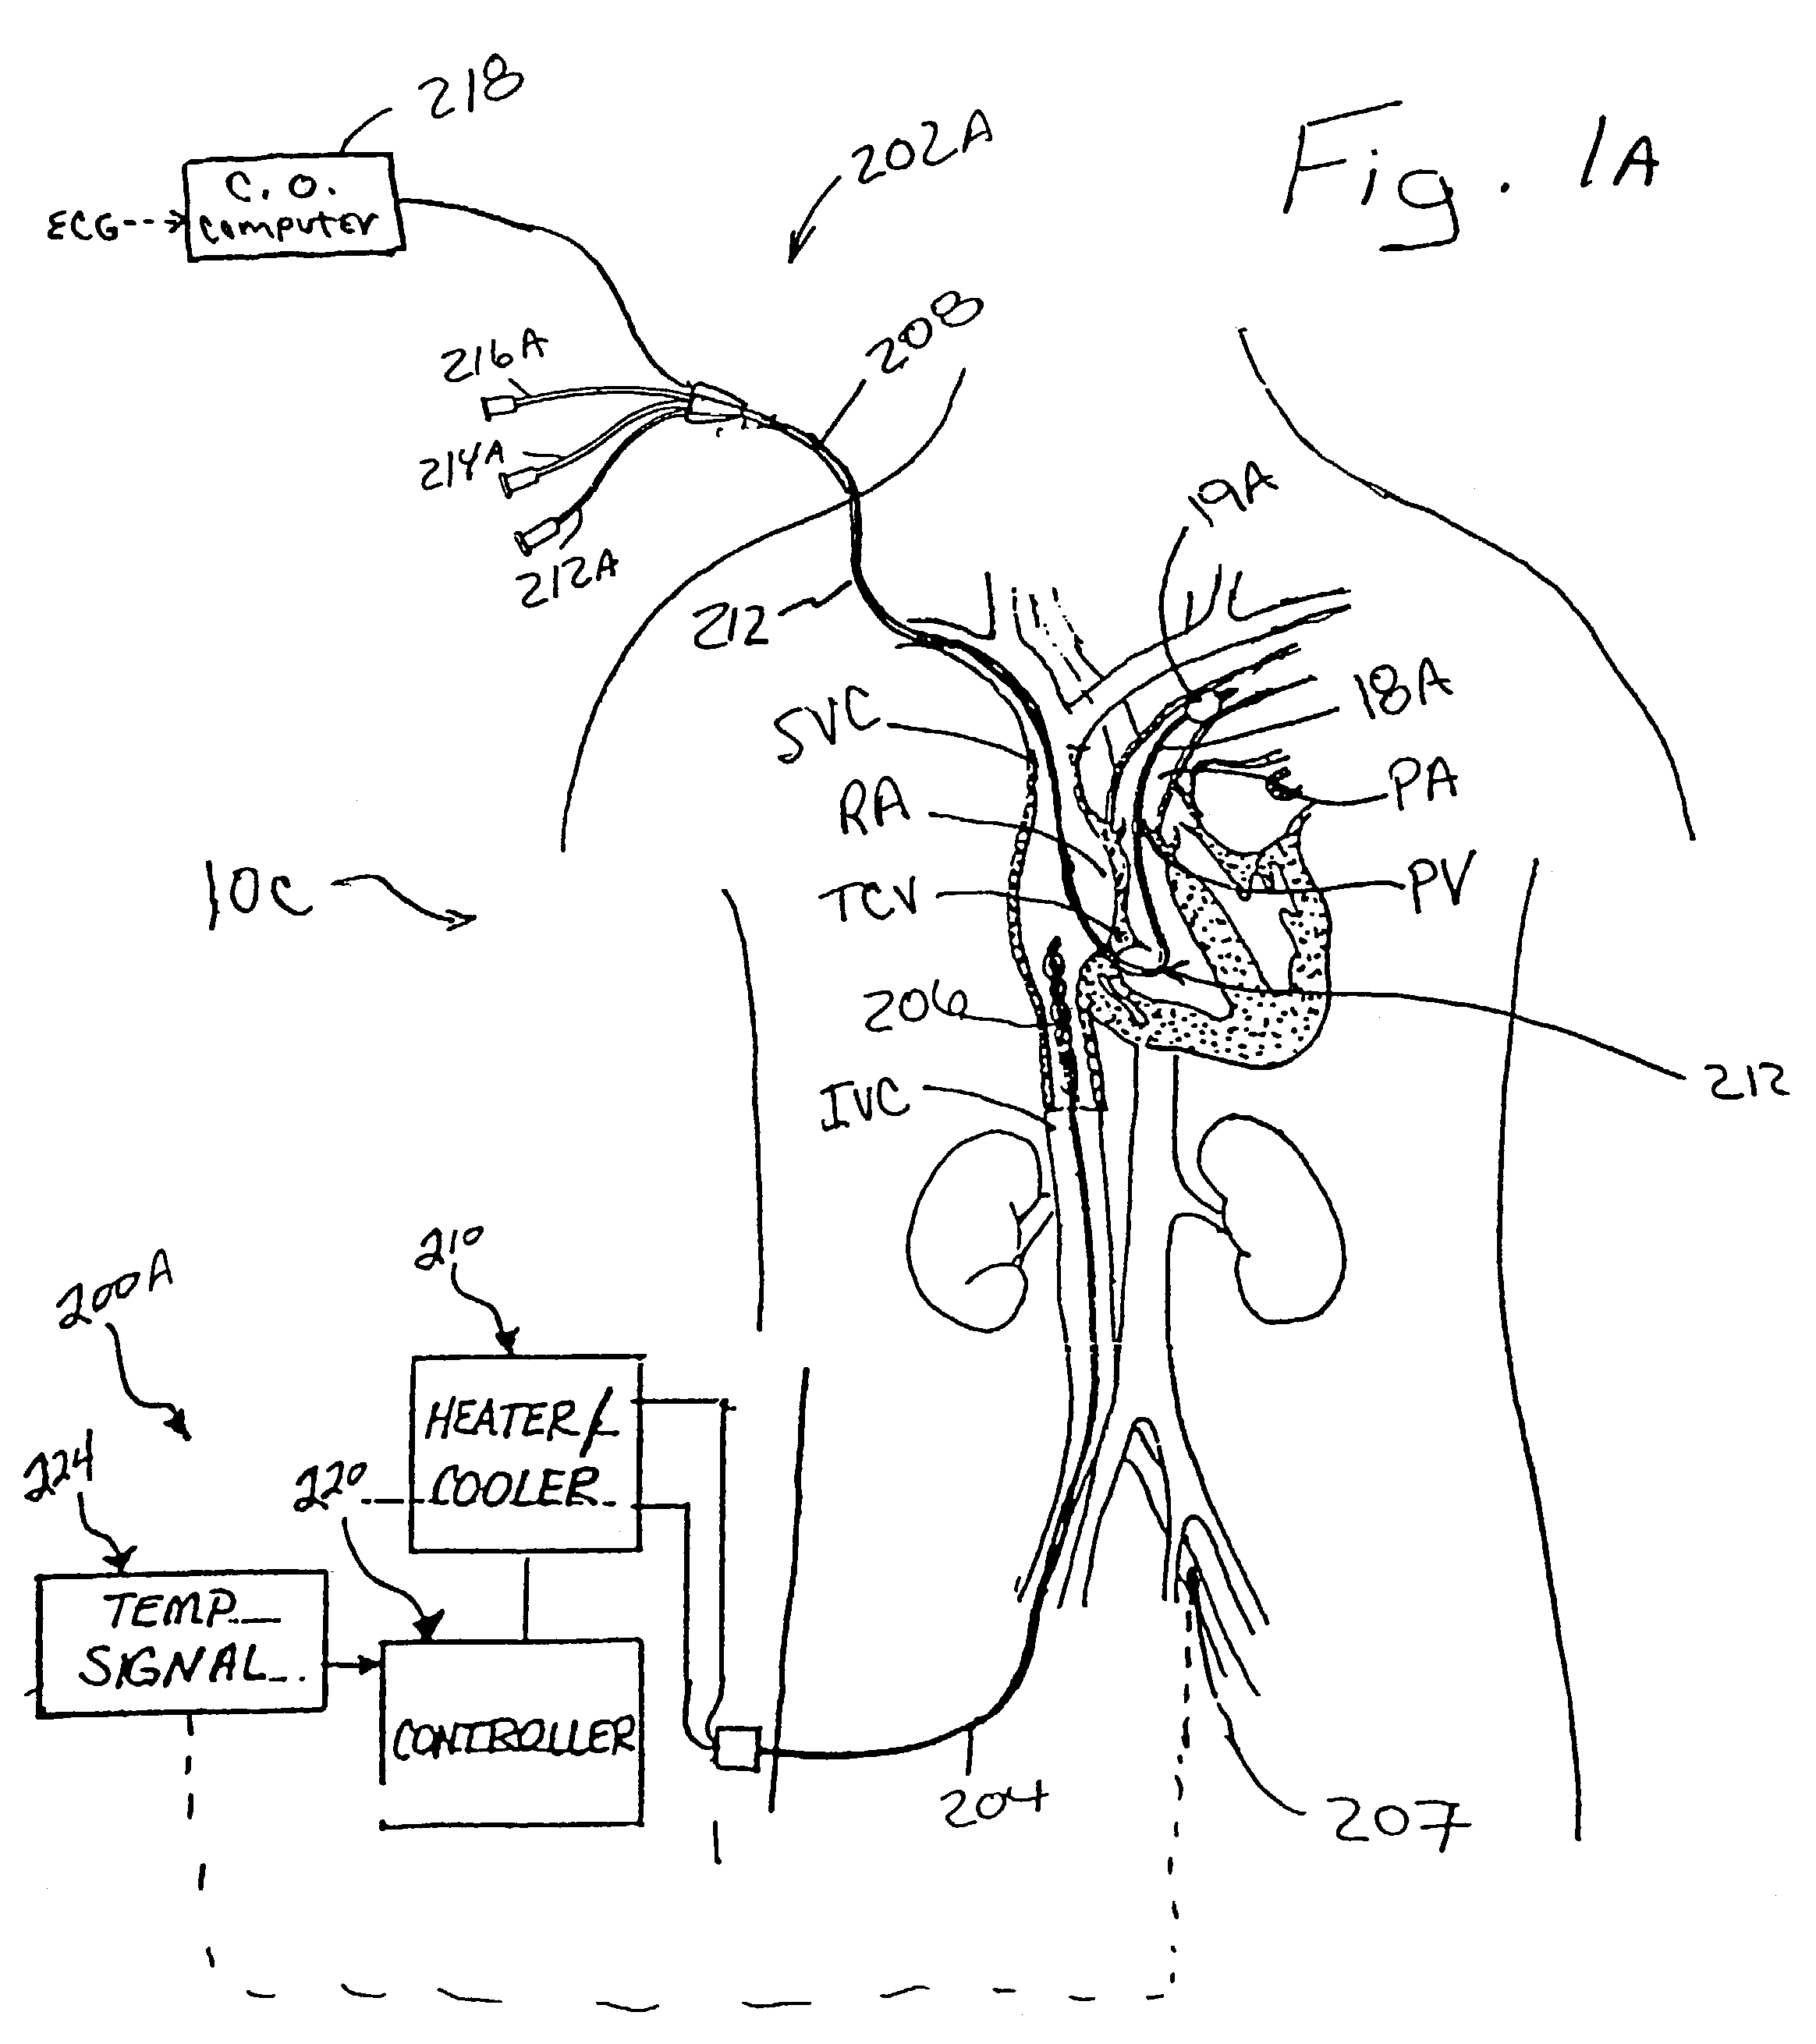 Devices and methods for measuring blood flow rate or cardiac output and for heating or cooling the body